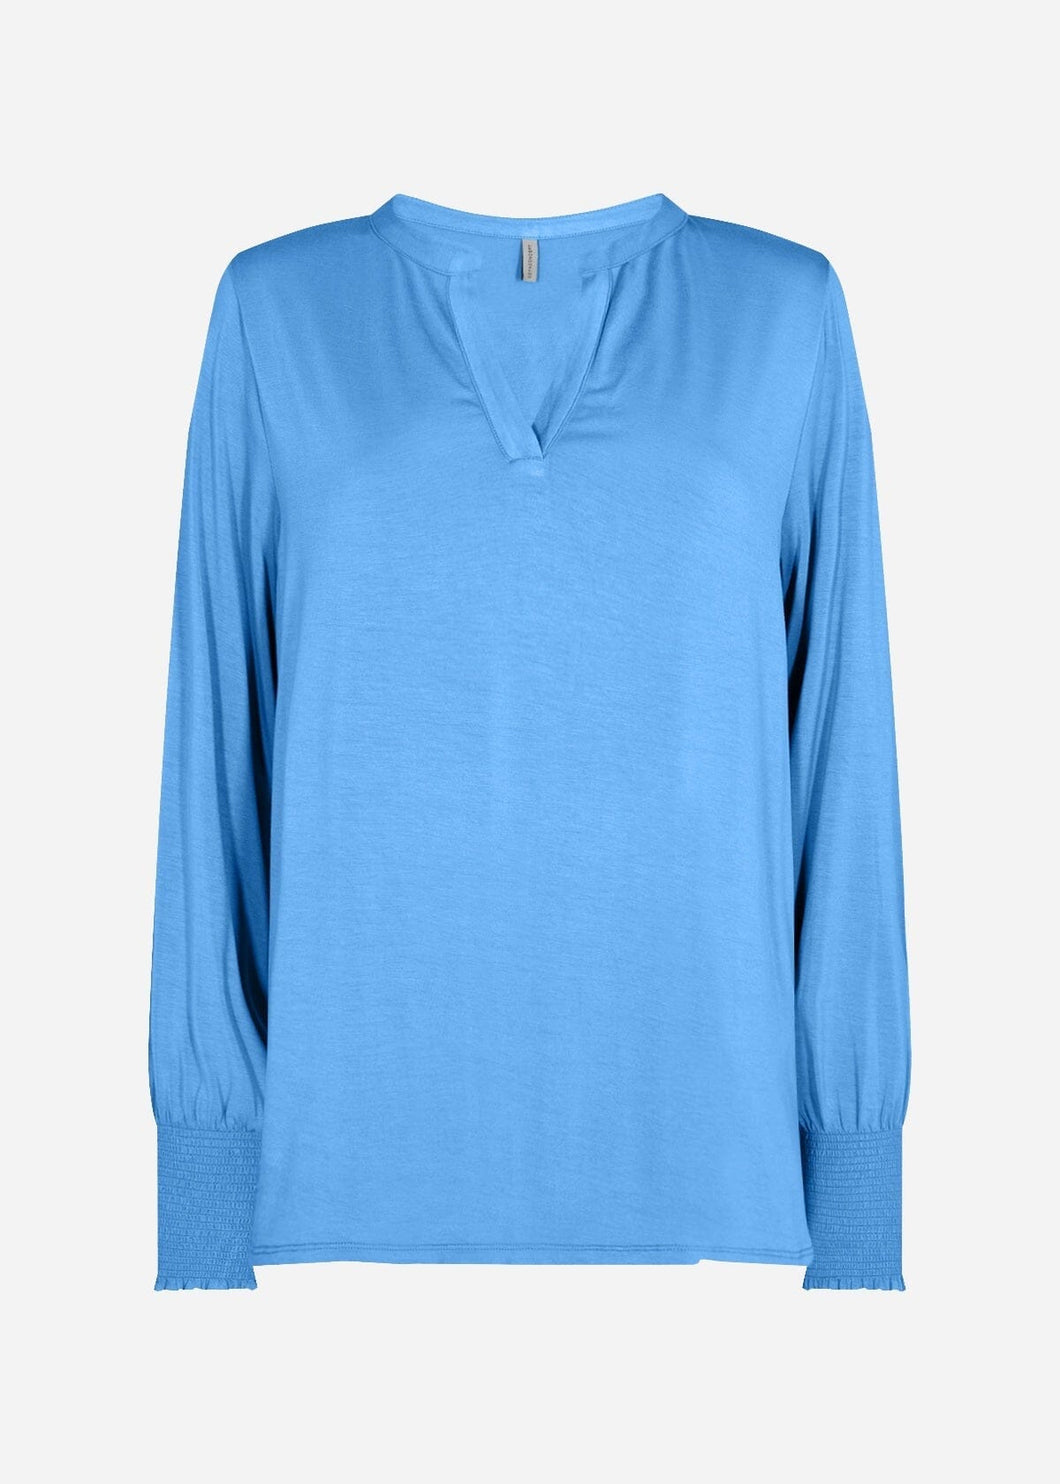 Marica Blouse in Bright Blue Blouse Soyaconcept 